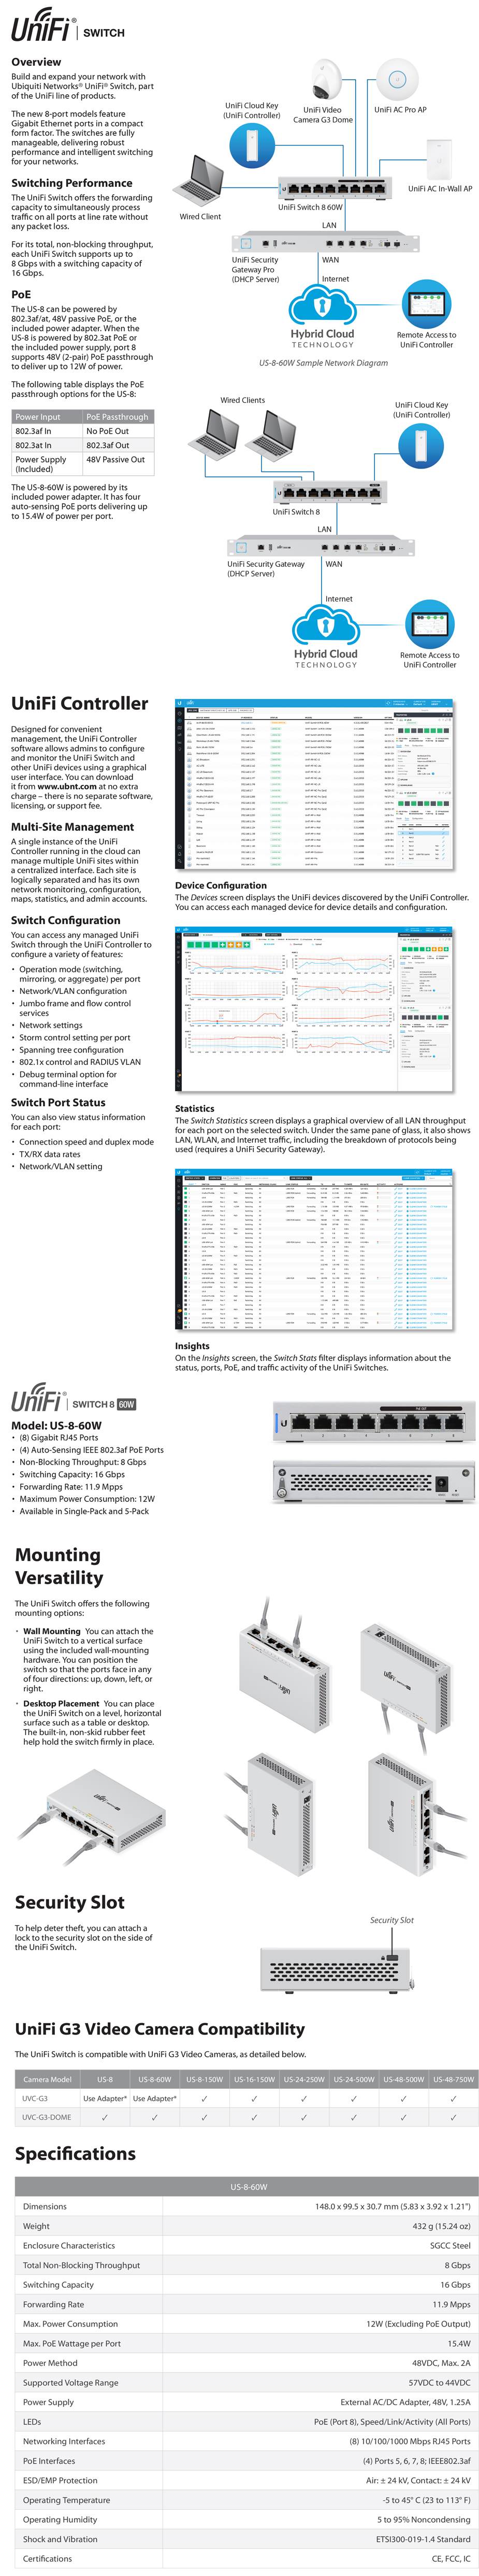 A large marketing image providing additional information about the product Ubiquiti UniFi Switch 8 Port 60W PoE Support - Additional alt info not provided